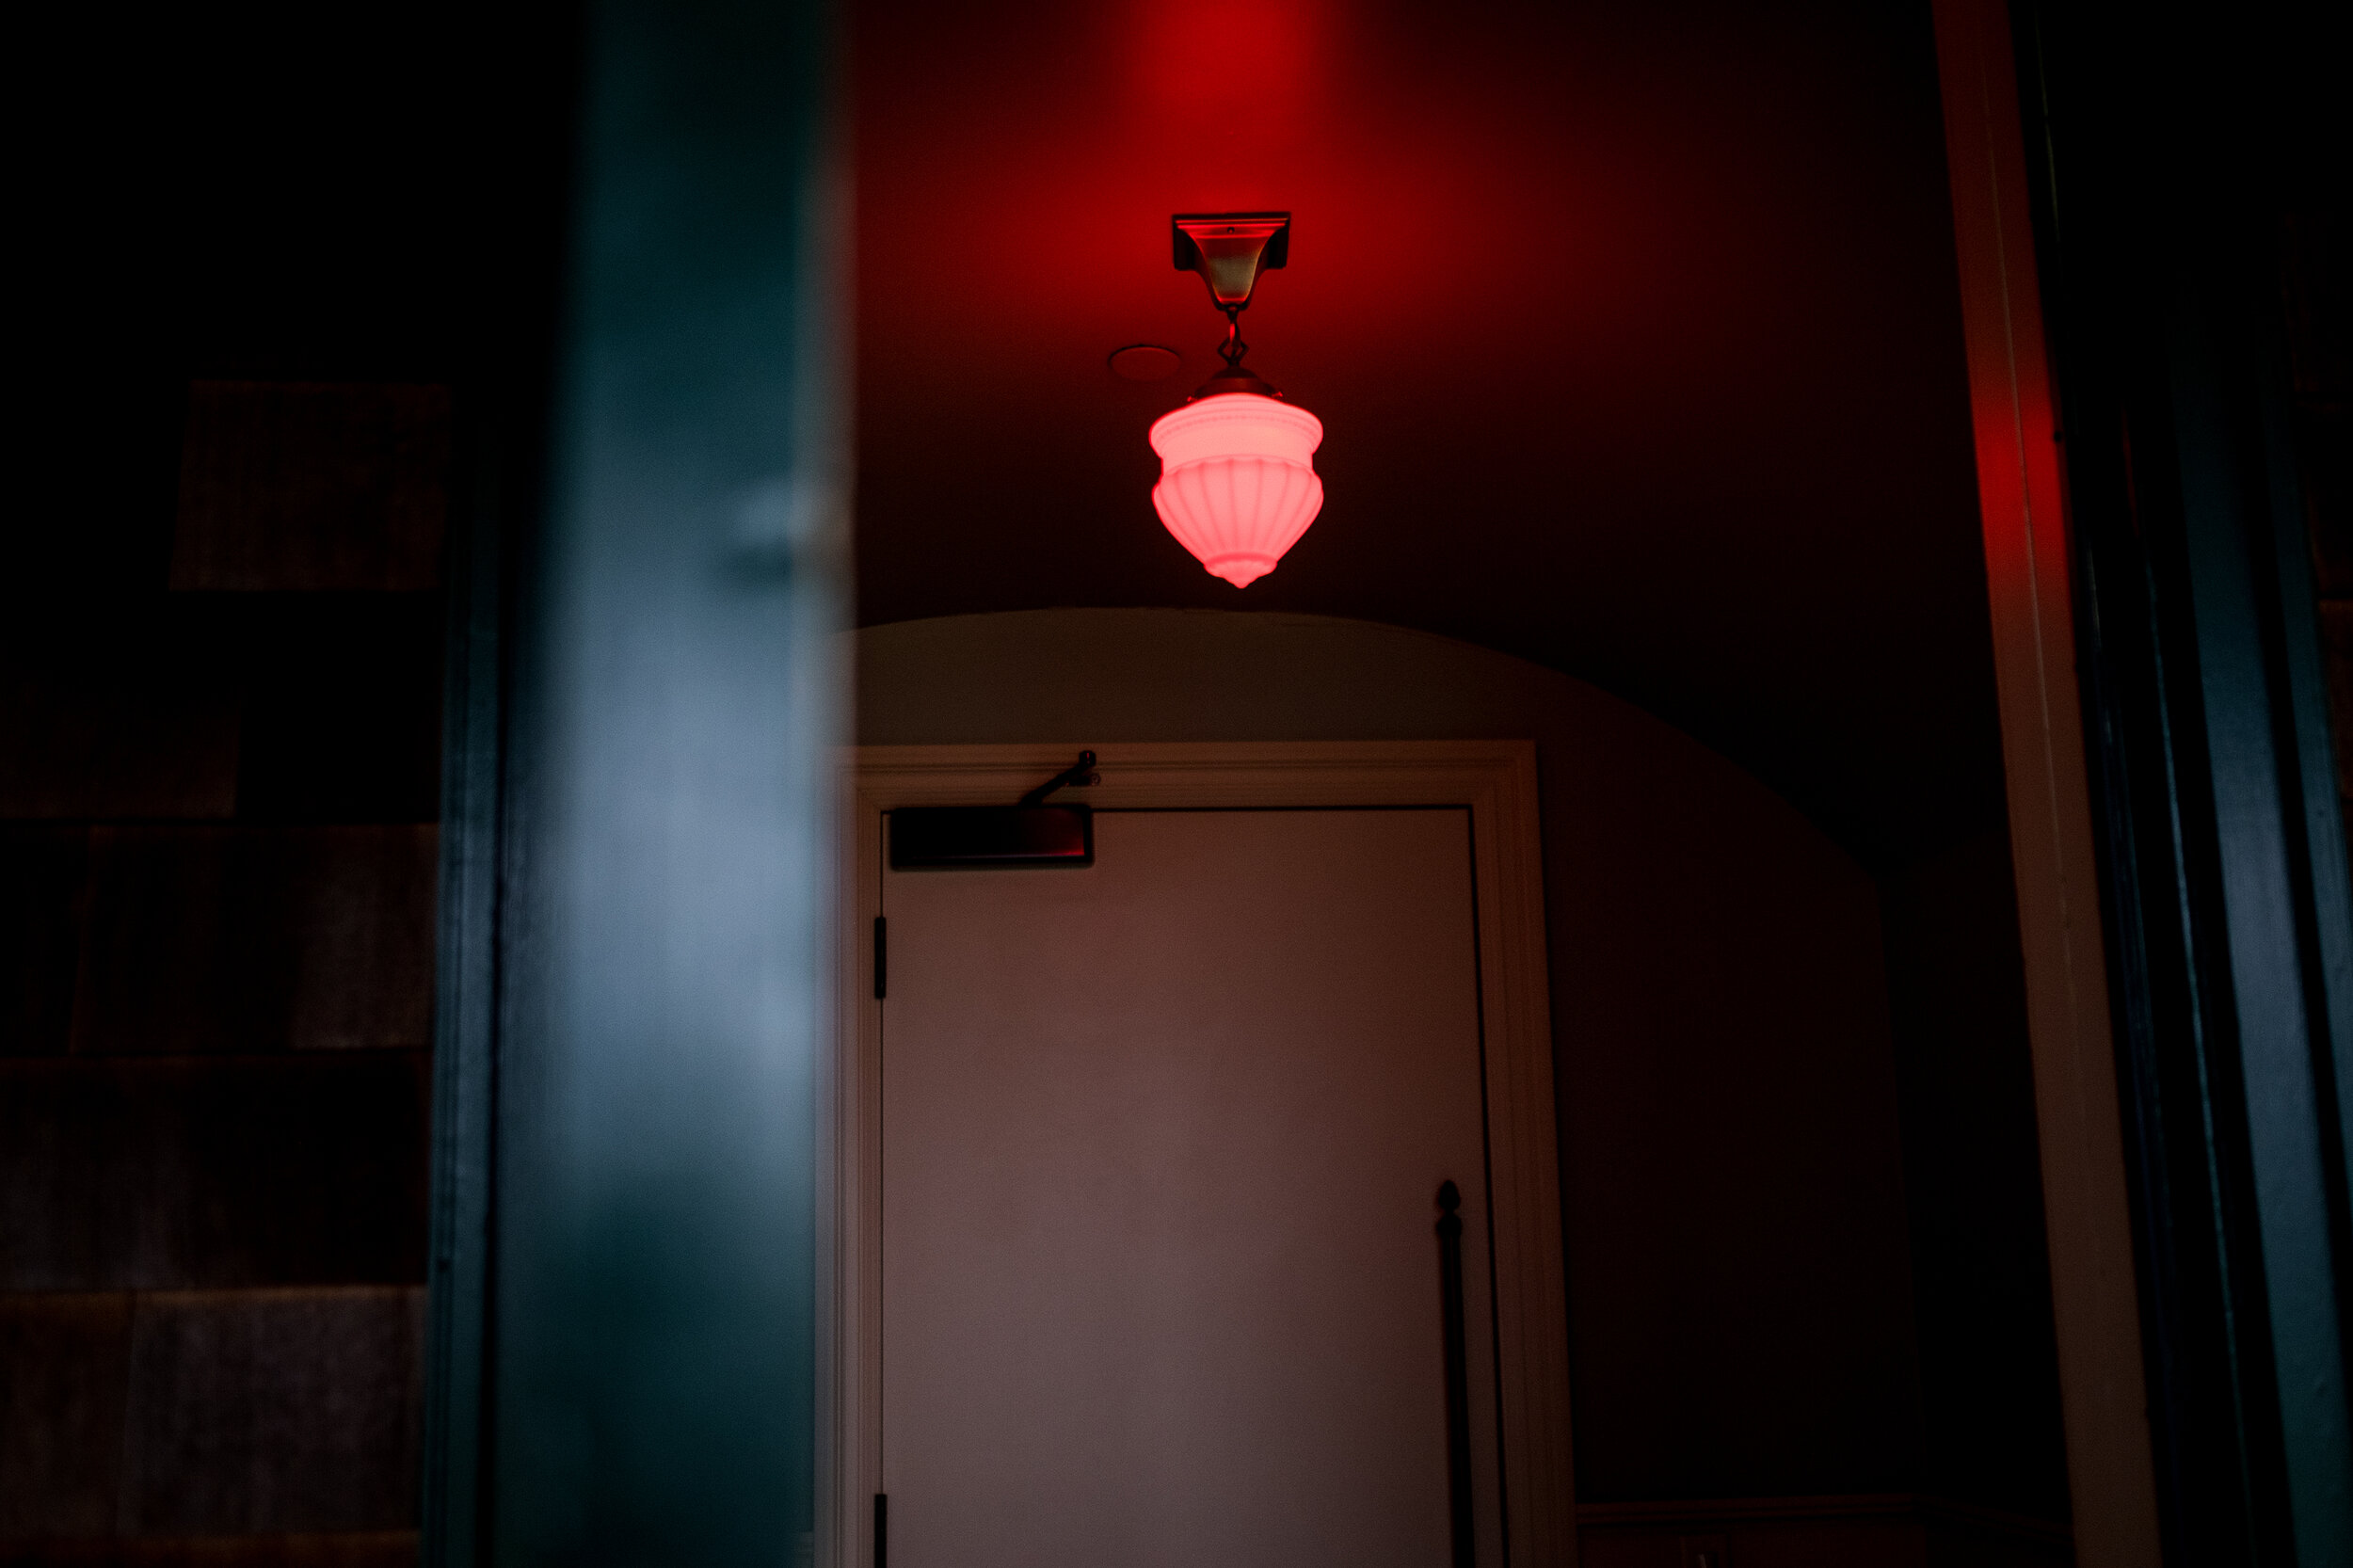  A red light demanding caution outside the doors of the theatre, indicating that the movie is currently screening. 